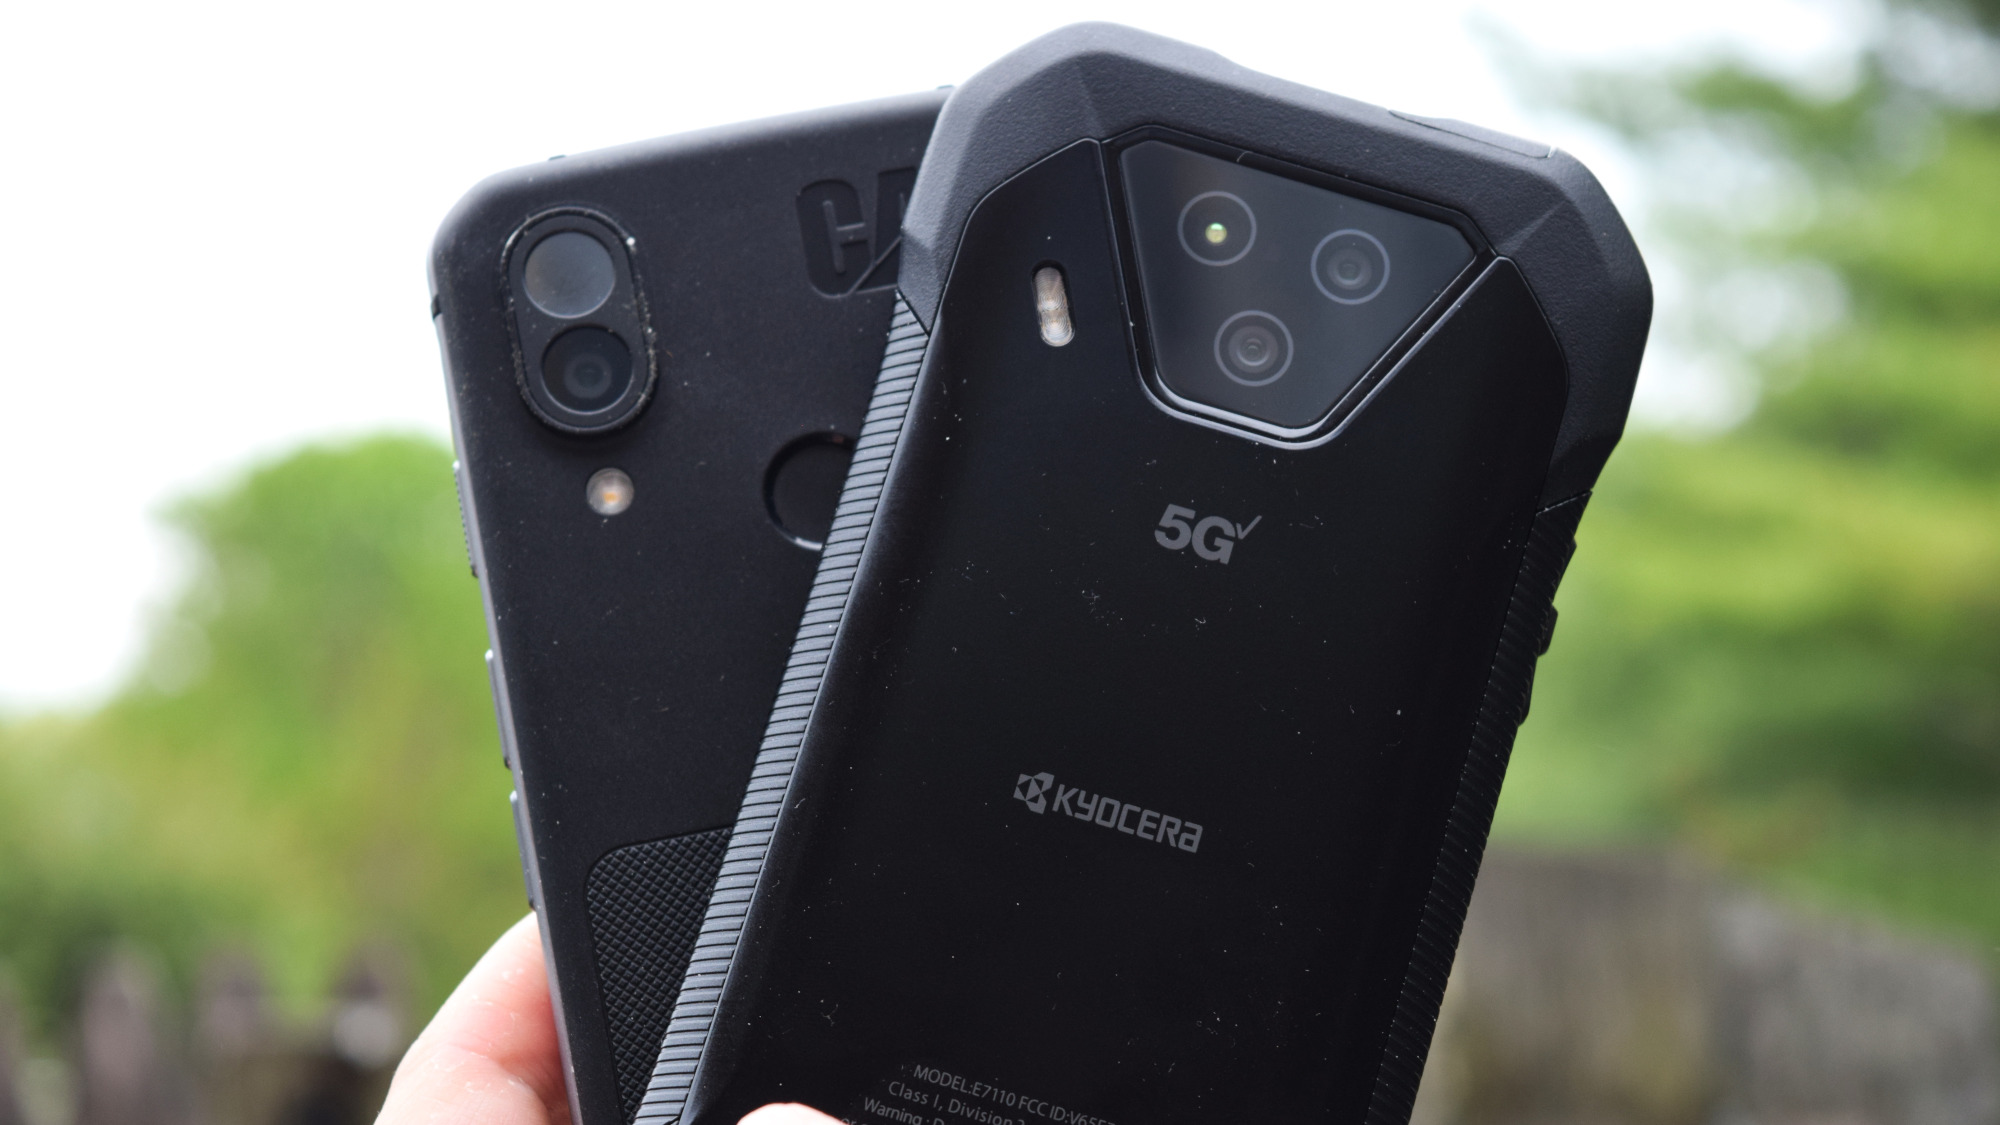 Kyocera DuraForce Ultra 5G UW vs. Cat S62 Pro: What’s the world’s best rugged phone? | Tom's Guide